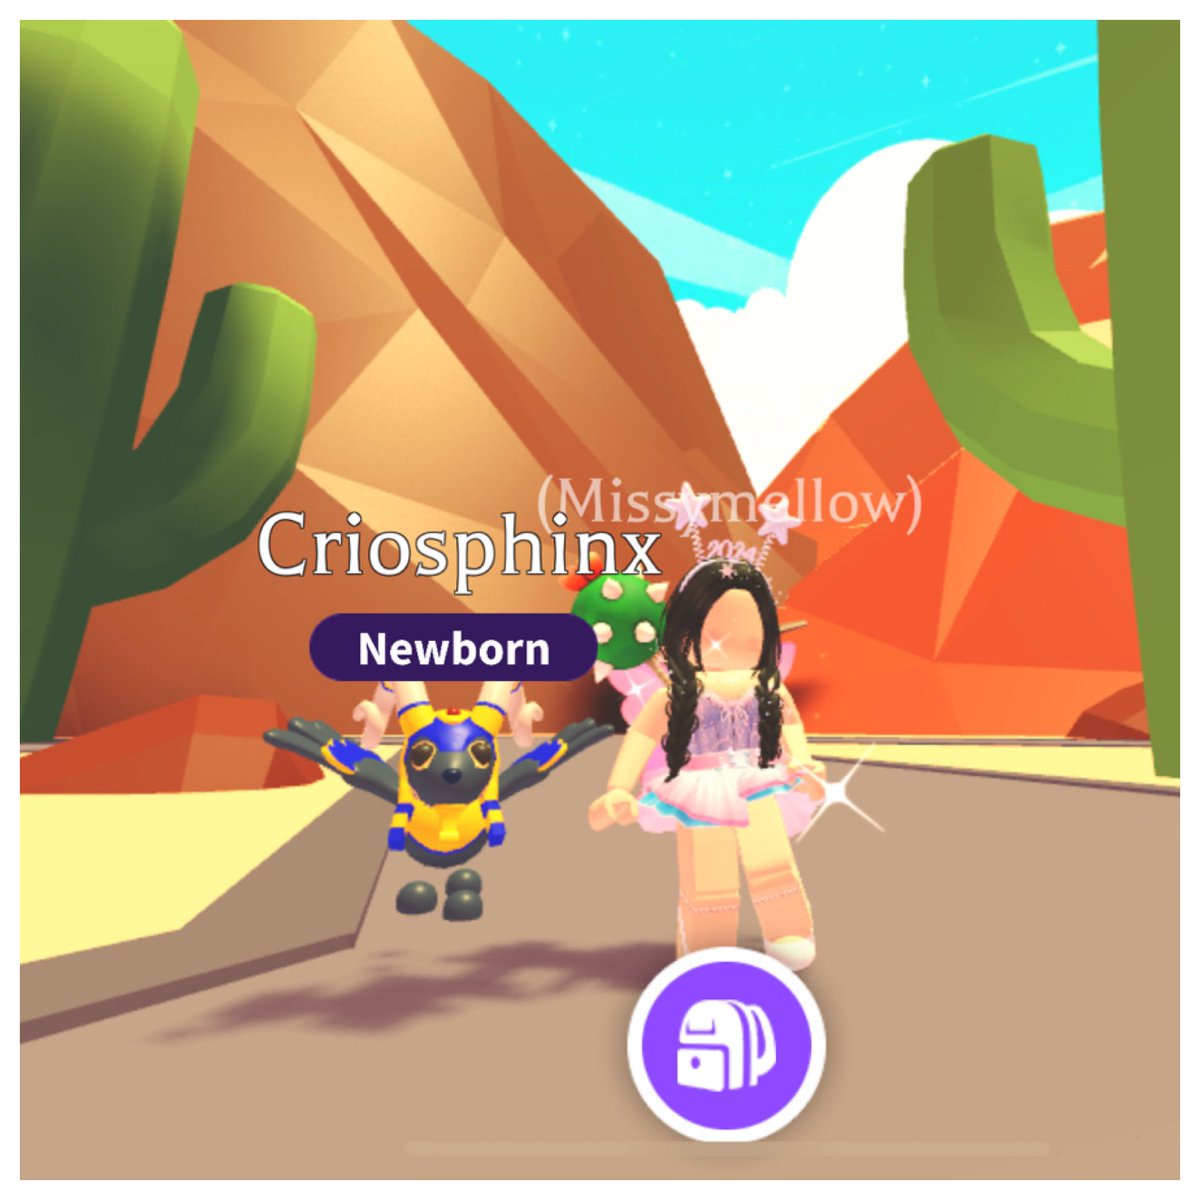 💙adoptme giveaway 💙 Tysm for 500+ follows 💜 Giving away Criosphinx 💙+ 5 desert eggs 🌵to 1x winner To enter: 💙 like & share 💙 follow me 💙 I want to know ur favorite desert egg pet!! Ends Friday 💜